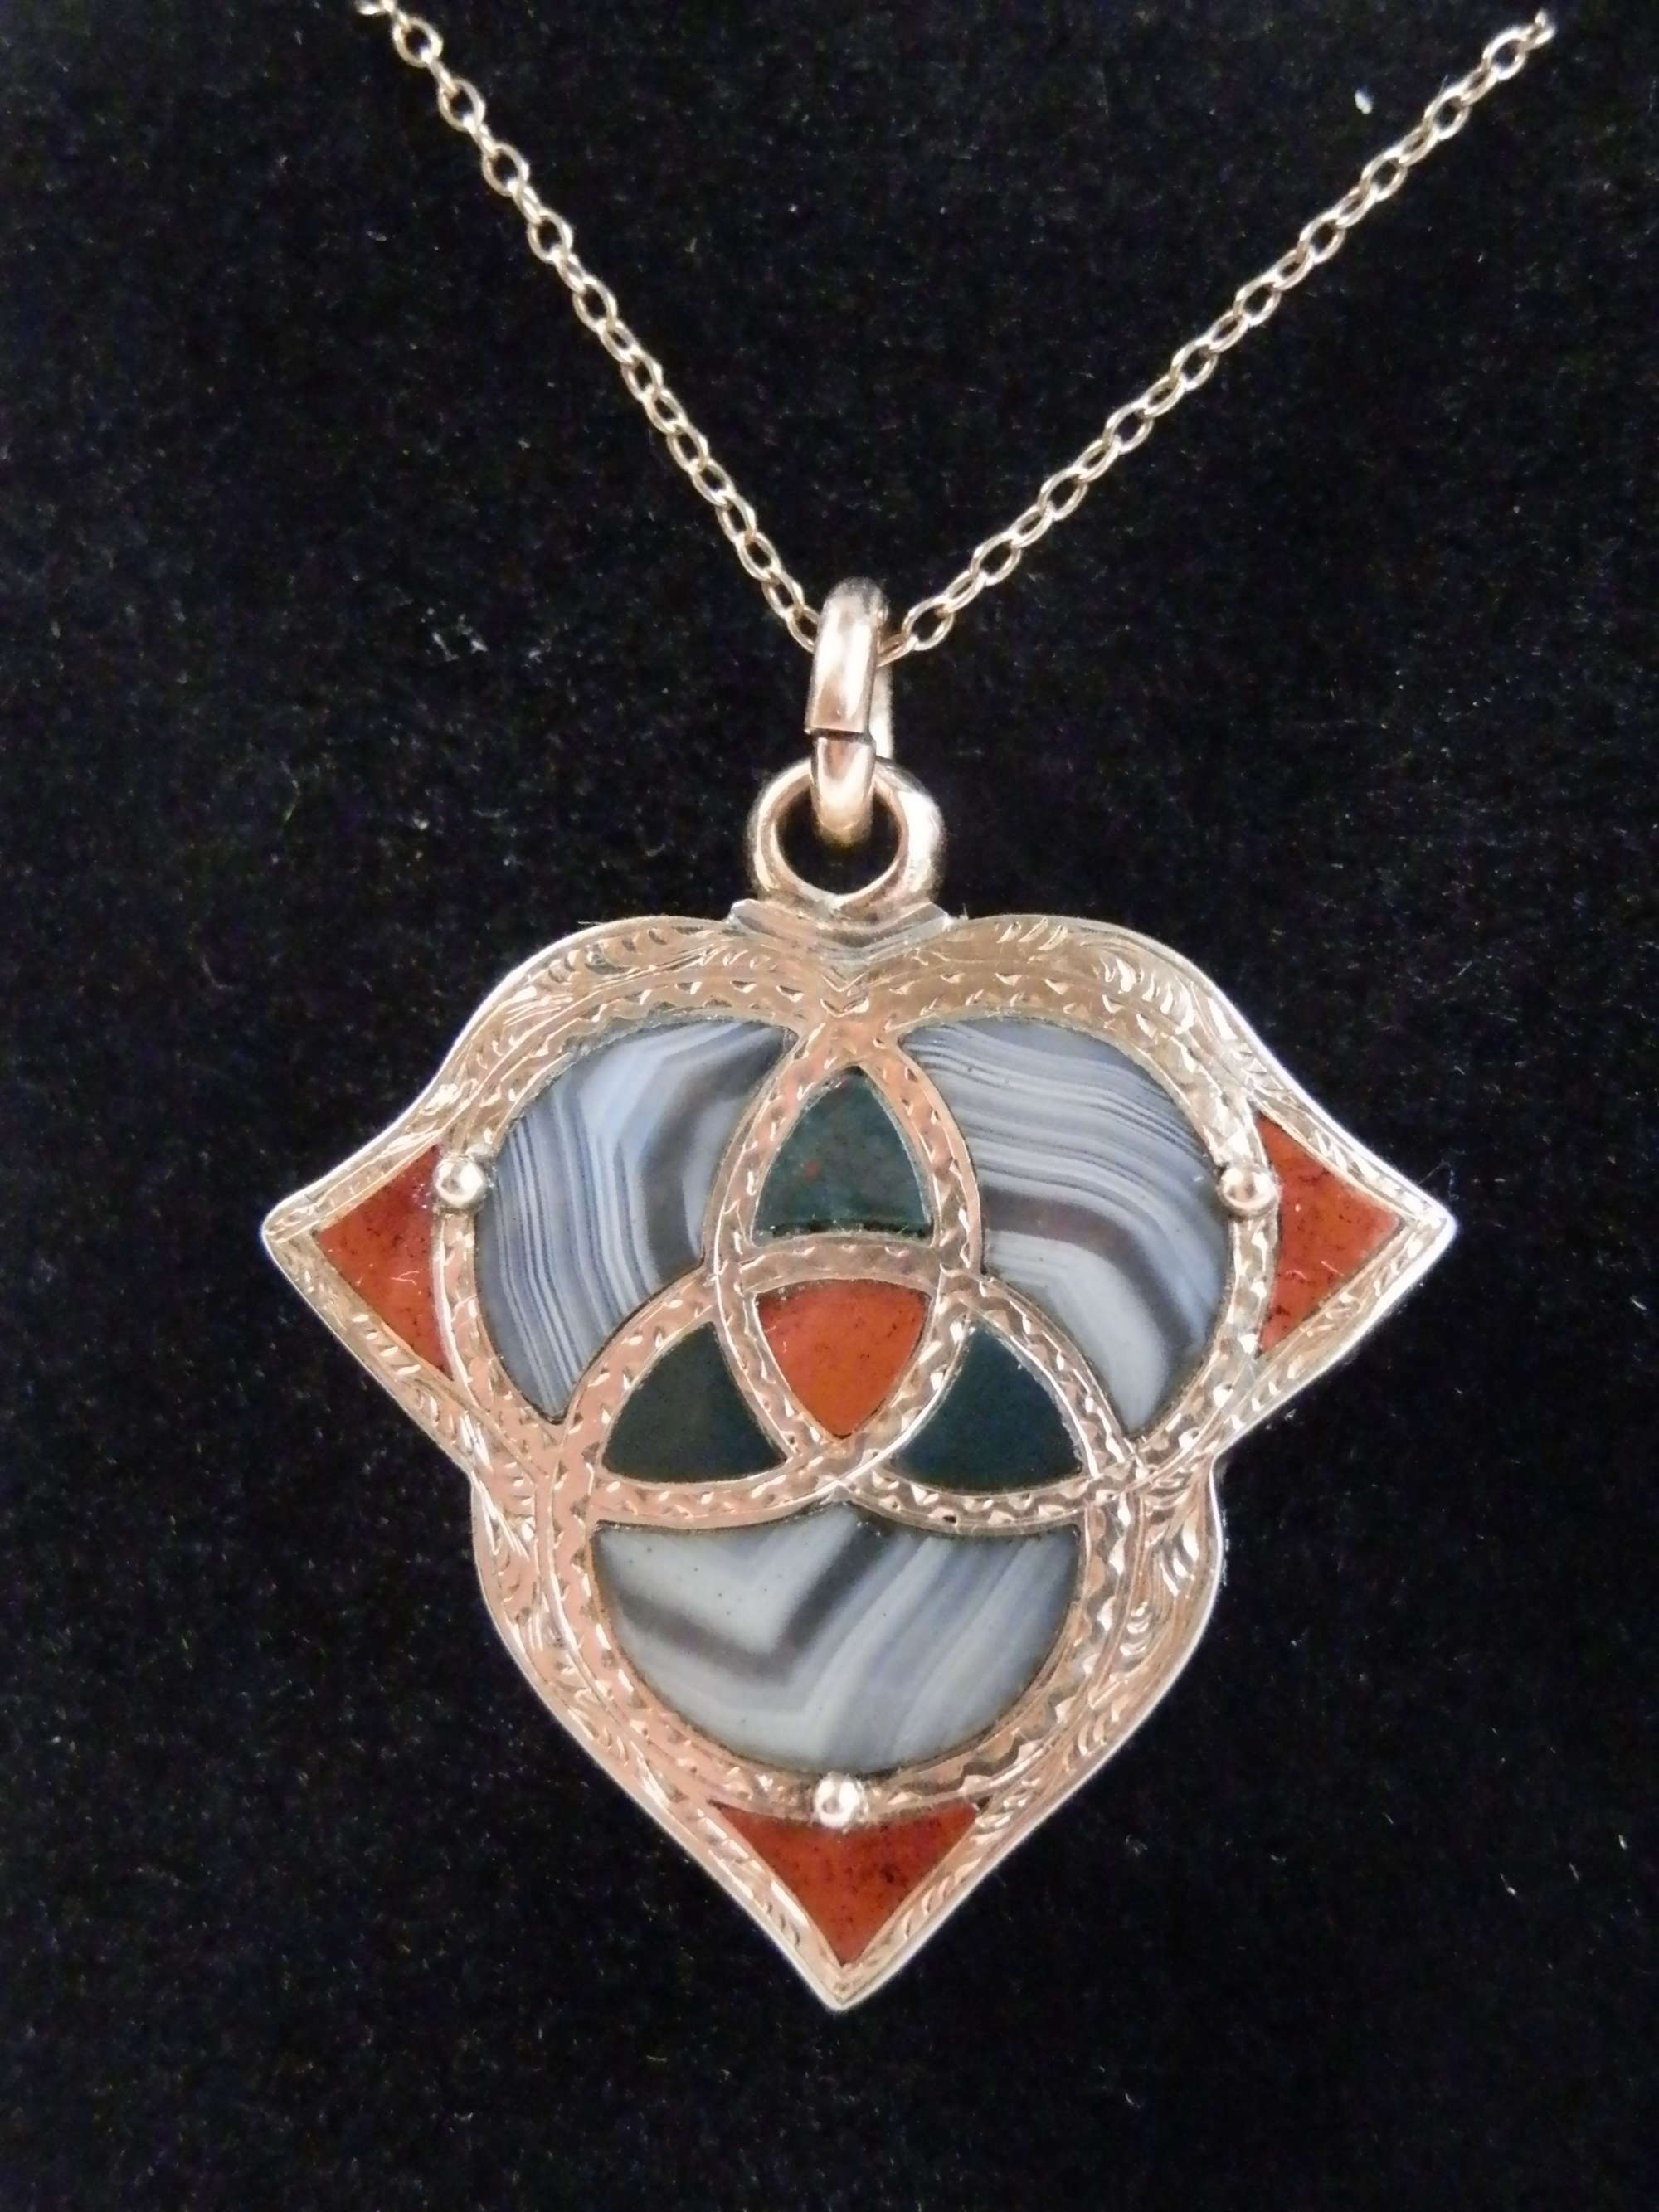 Victorian gold and agate pendant/locket. c.1880